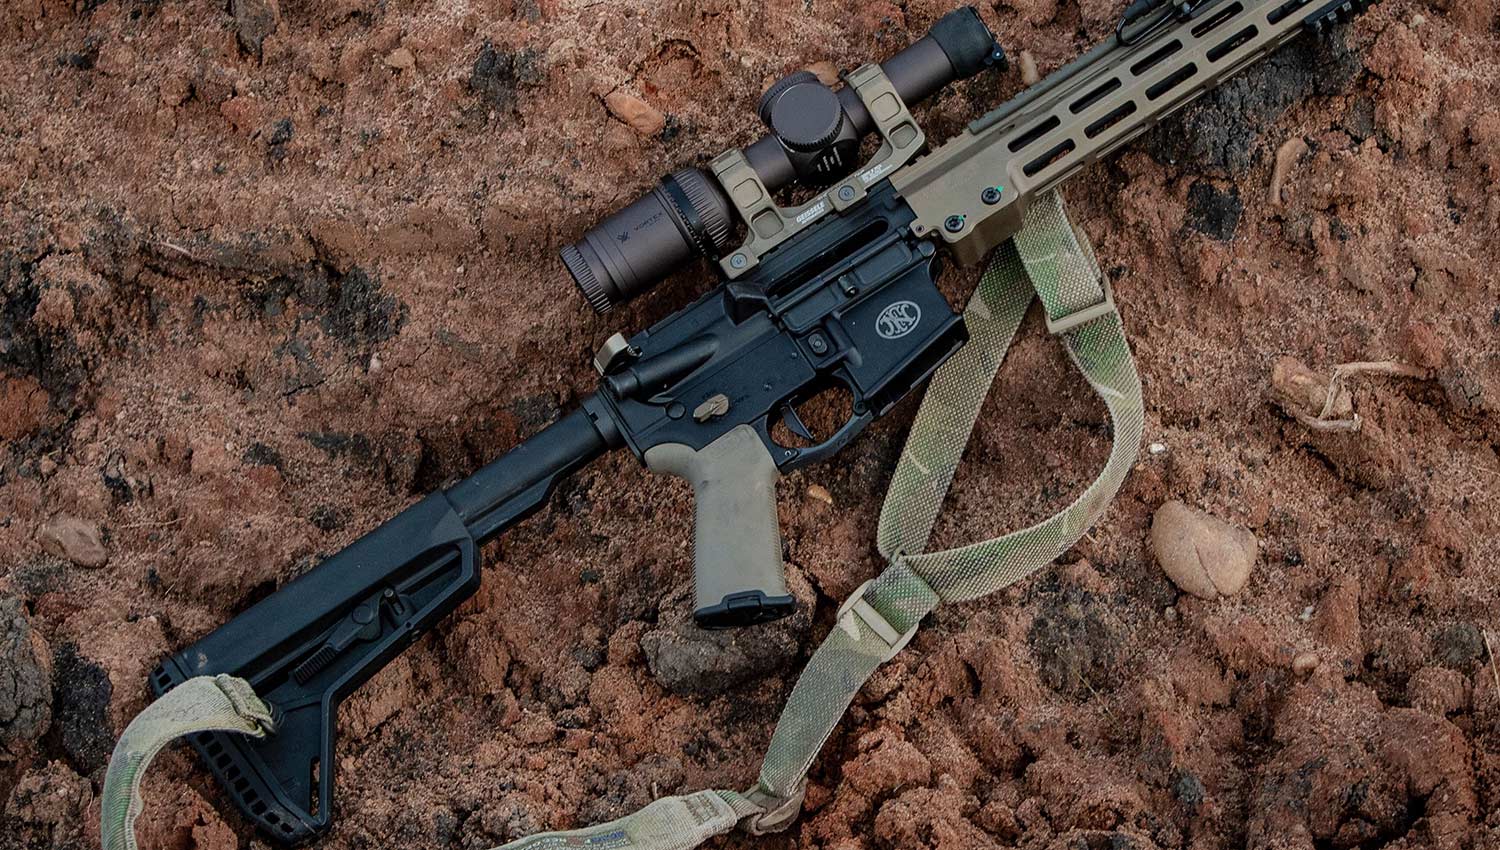 An AR rifle laying on the rocky ground.